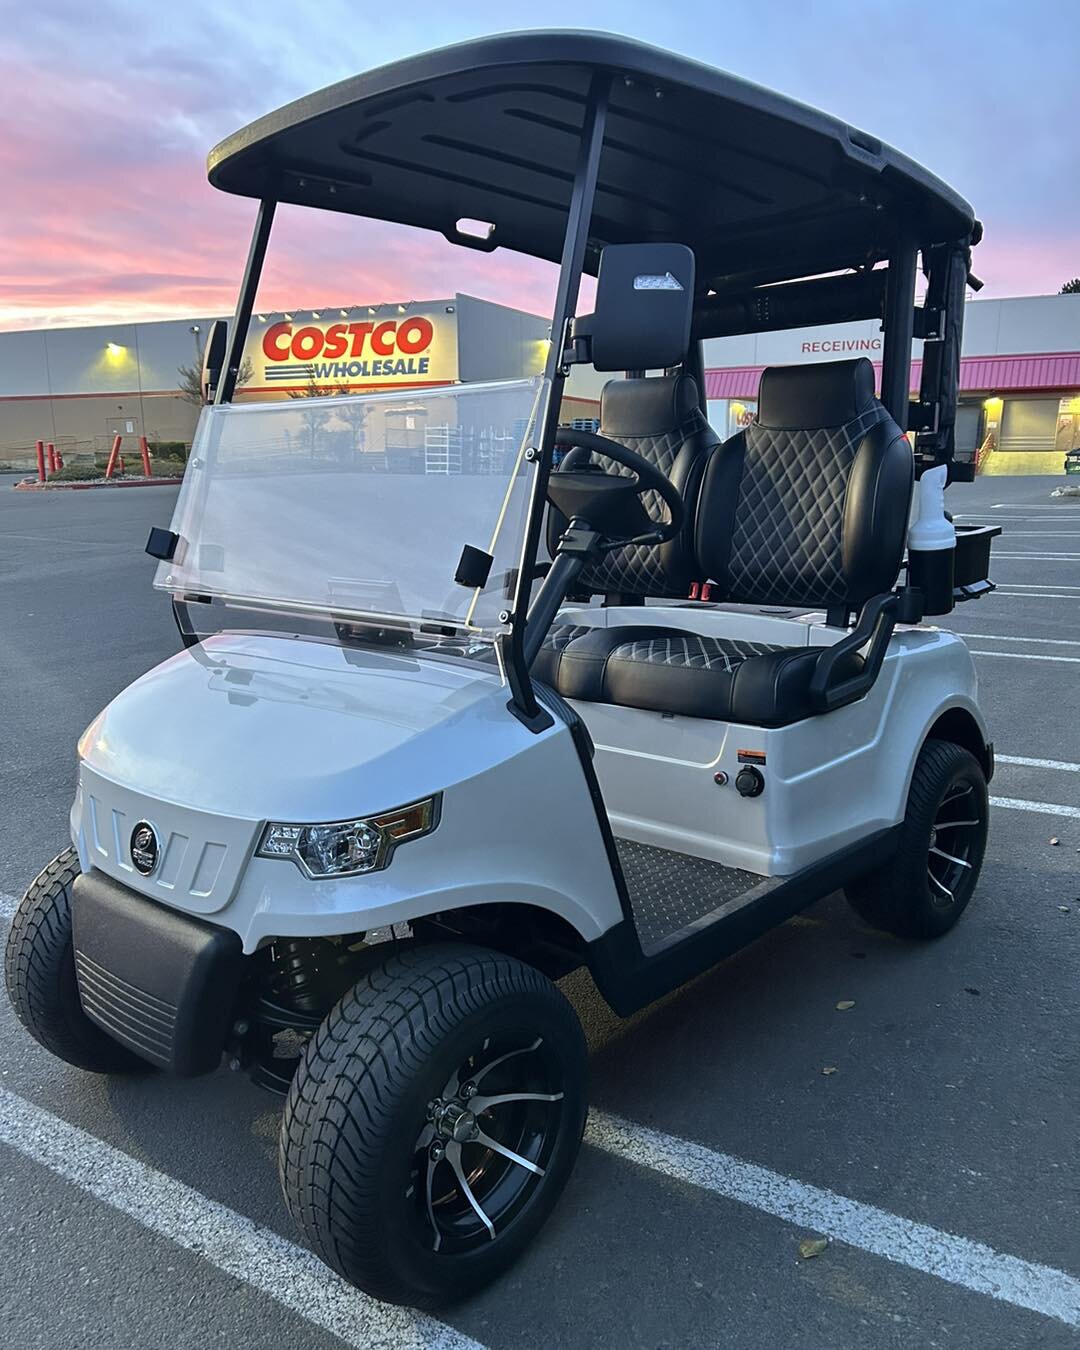 The sun has officially set on an #epic event here at #costco! We&rsquo;re loaded up and headed back to the shop to relax for the holiday. Come see us next weekend in Camas for another #iconelectricvehicles special event! Call the shop to schedule a t